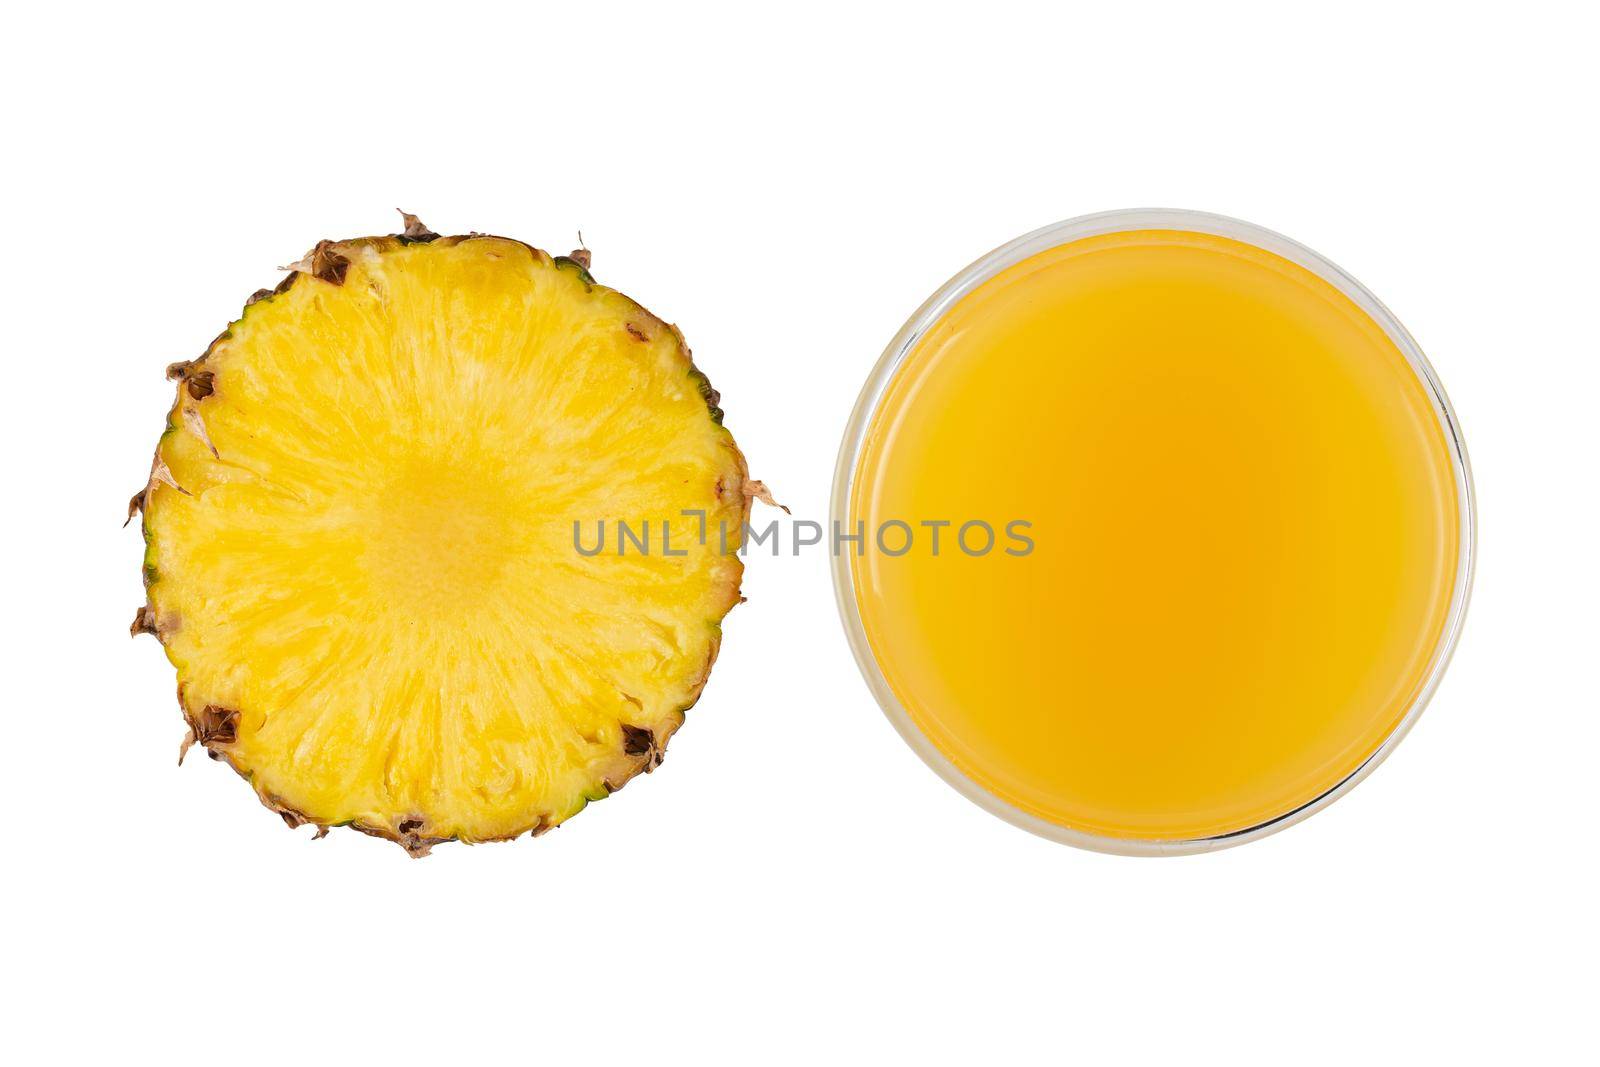 Pineapple pattern mix of tropical citrus fruit and juice in glass on white background.